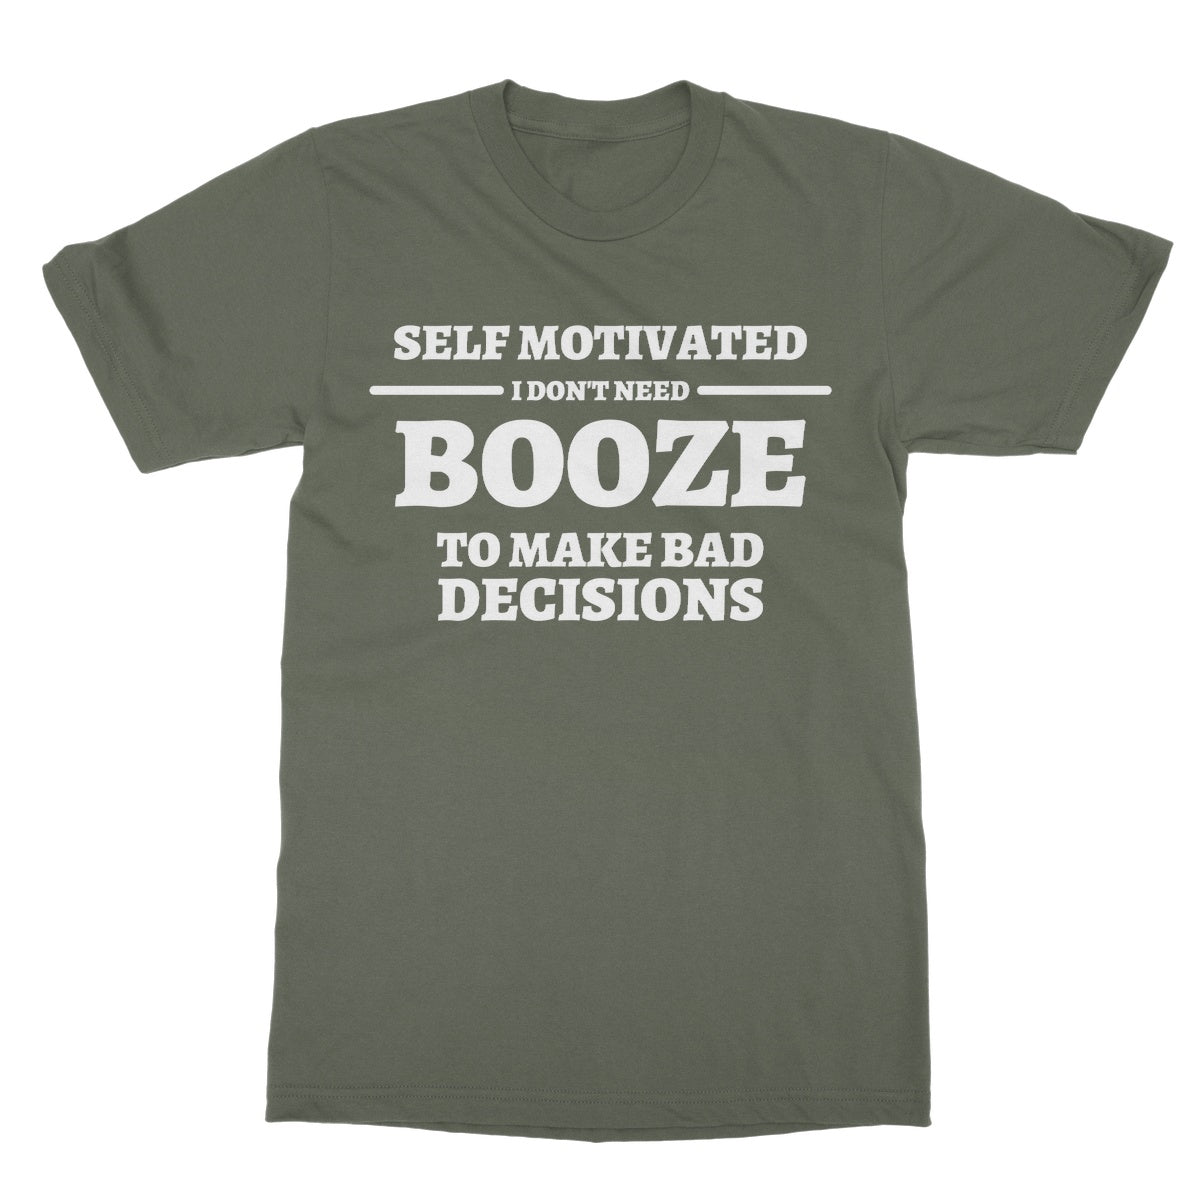 I don't need booze to make bad decisions t shirt green